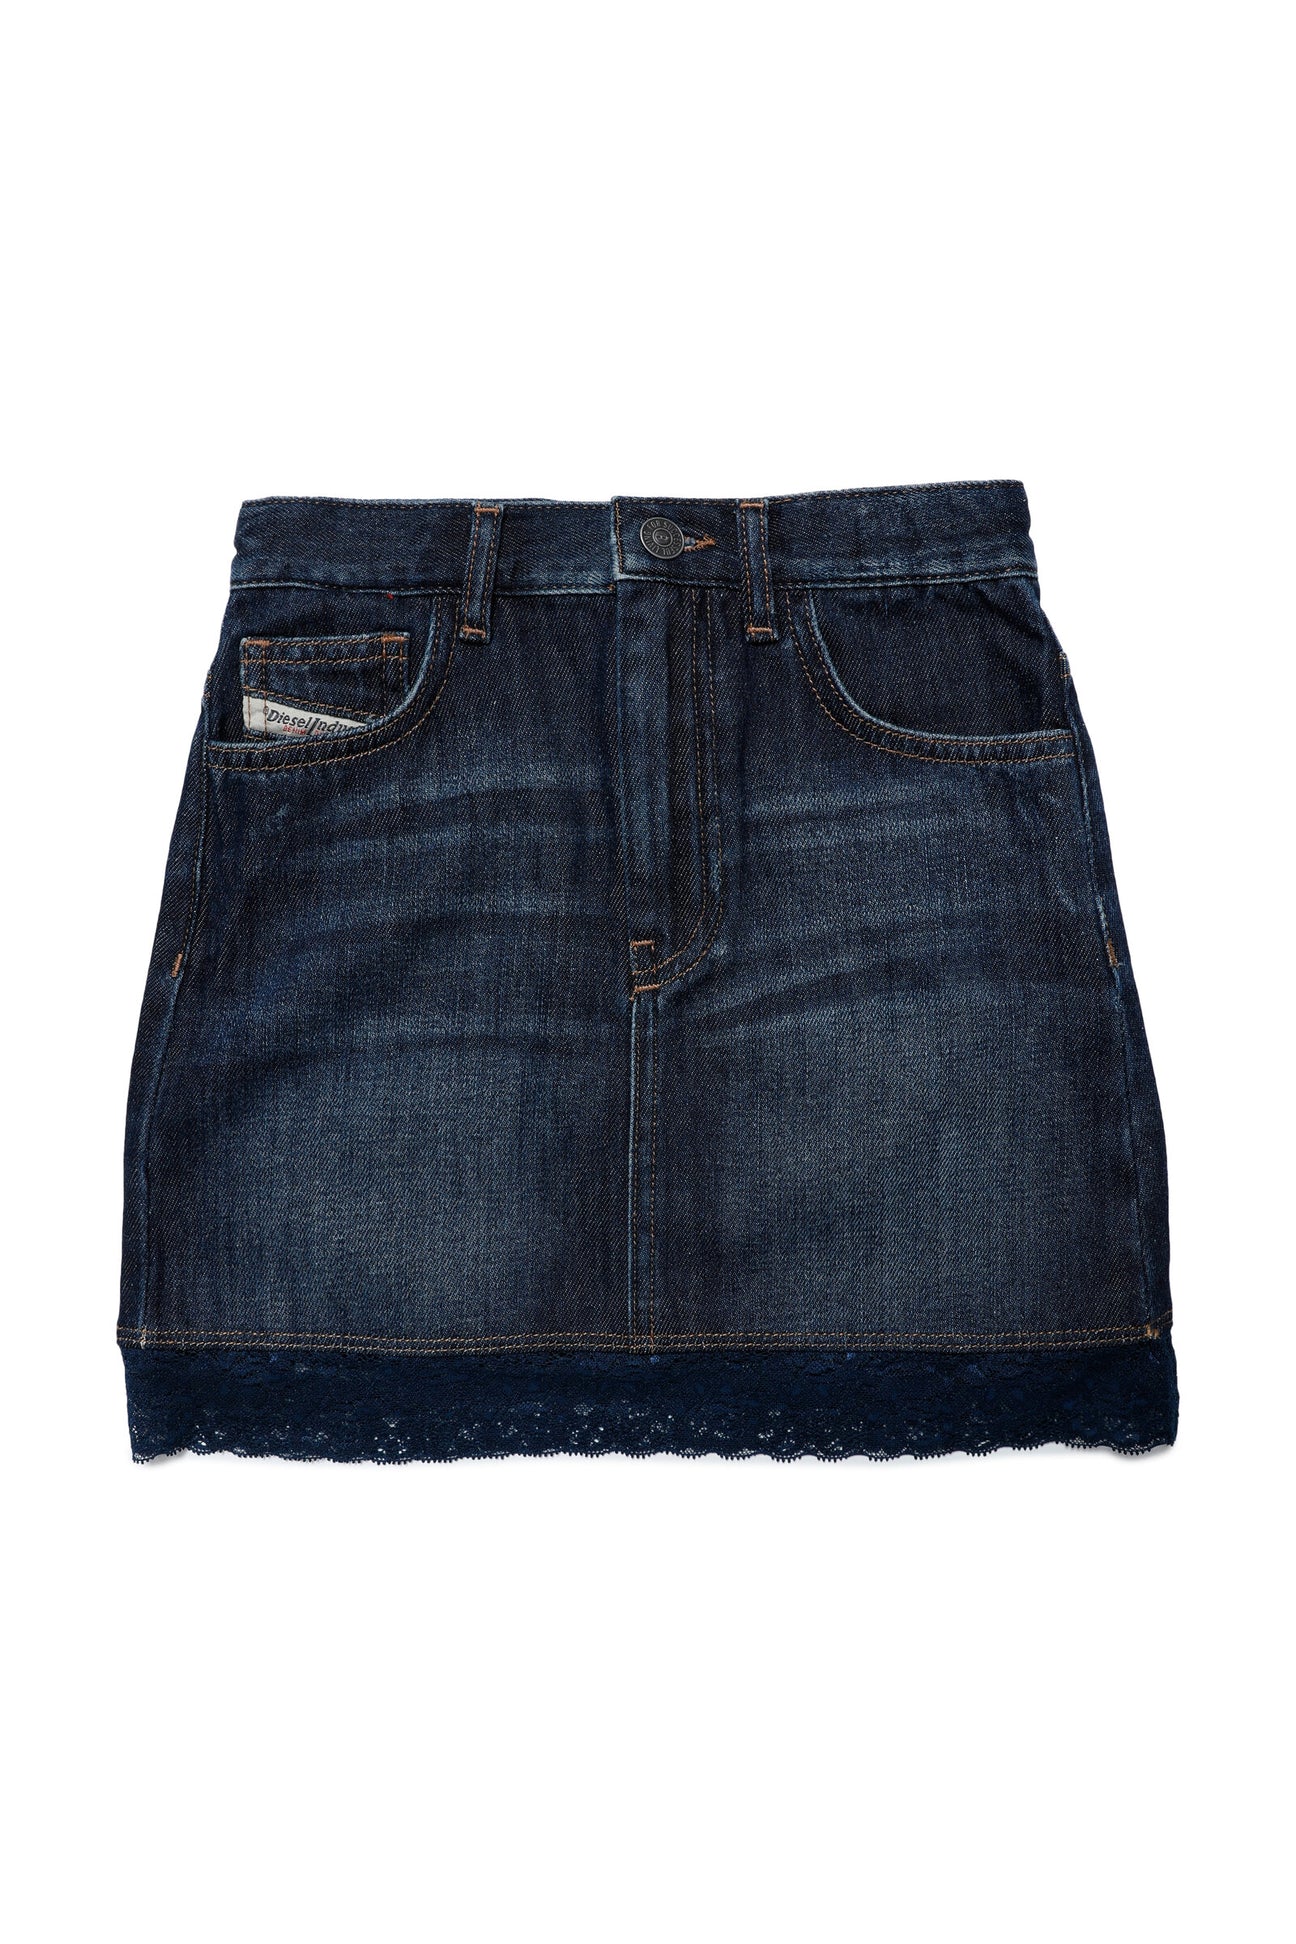 Blue denim skirt with lace bottom 